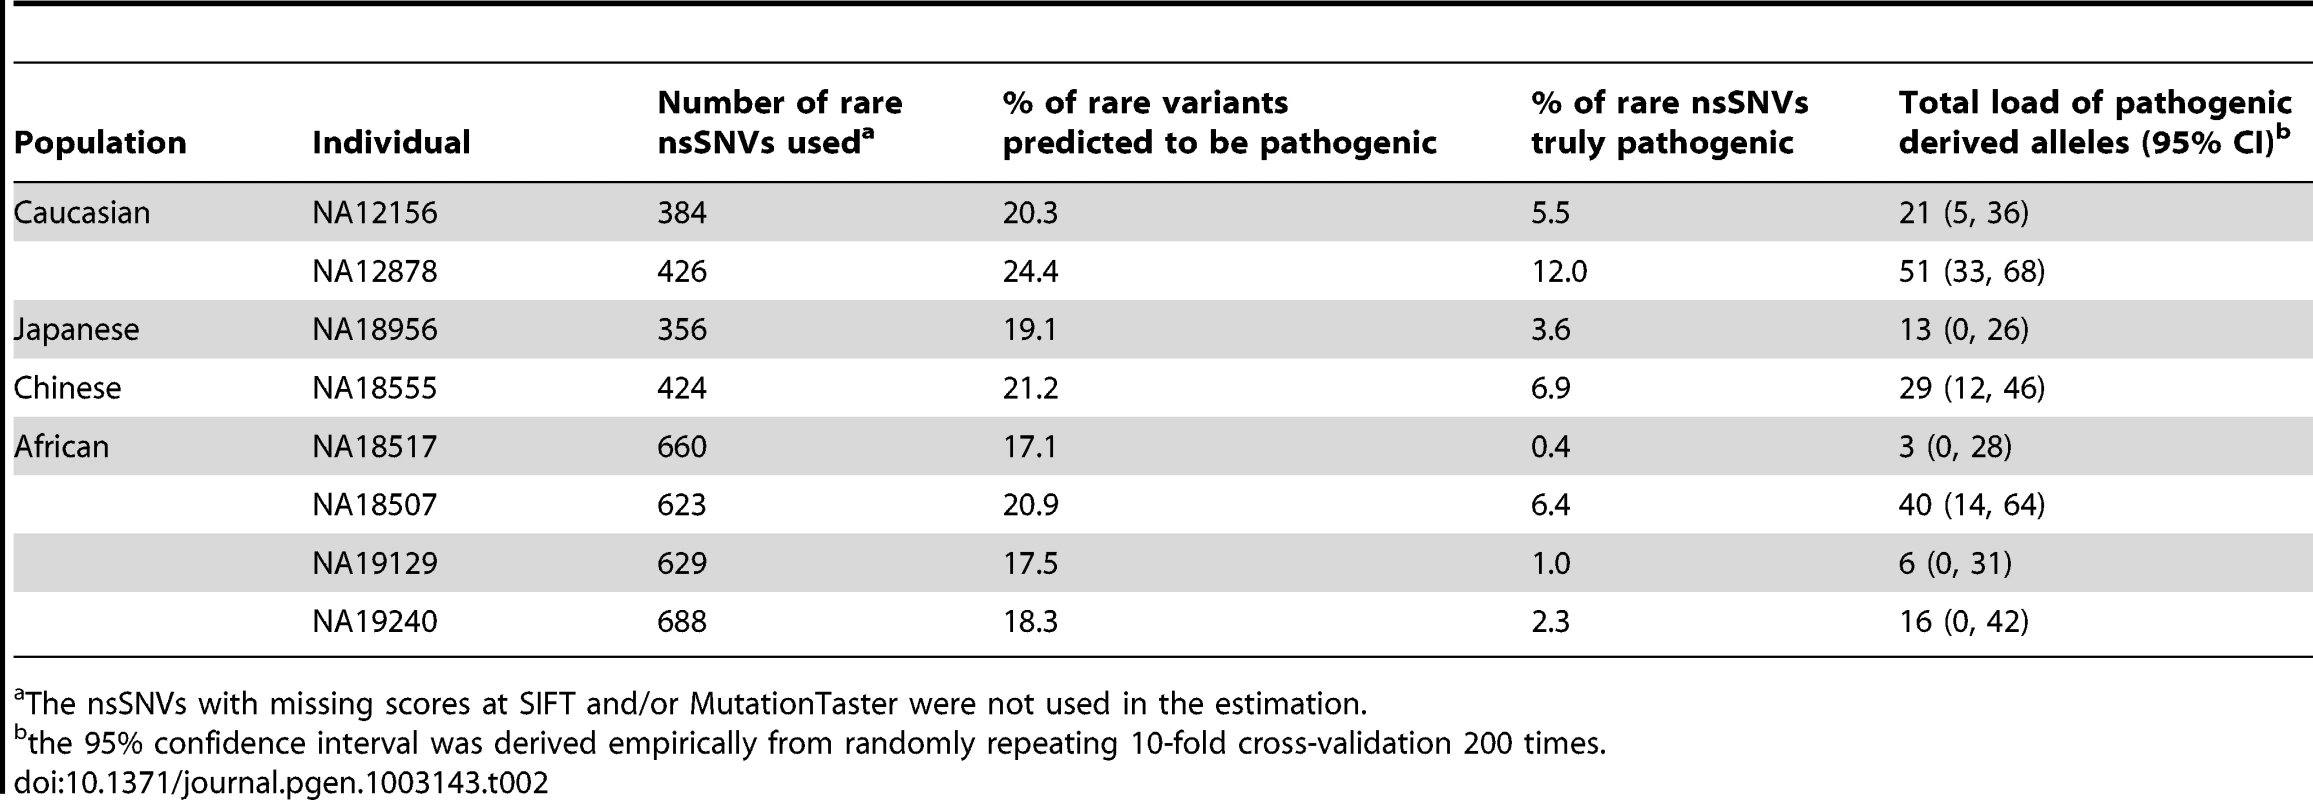 The proportion of pathogenic rare nsSNVs and total load of pathogenic derived alleles in 8 HapMap subjects with high coverage sequencing data.